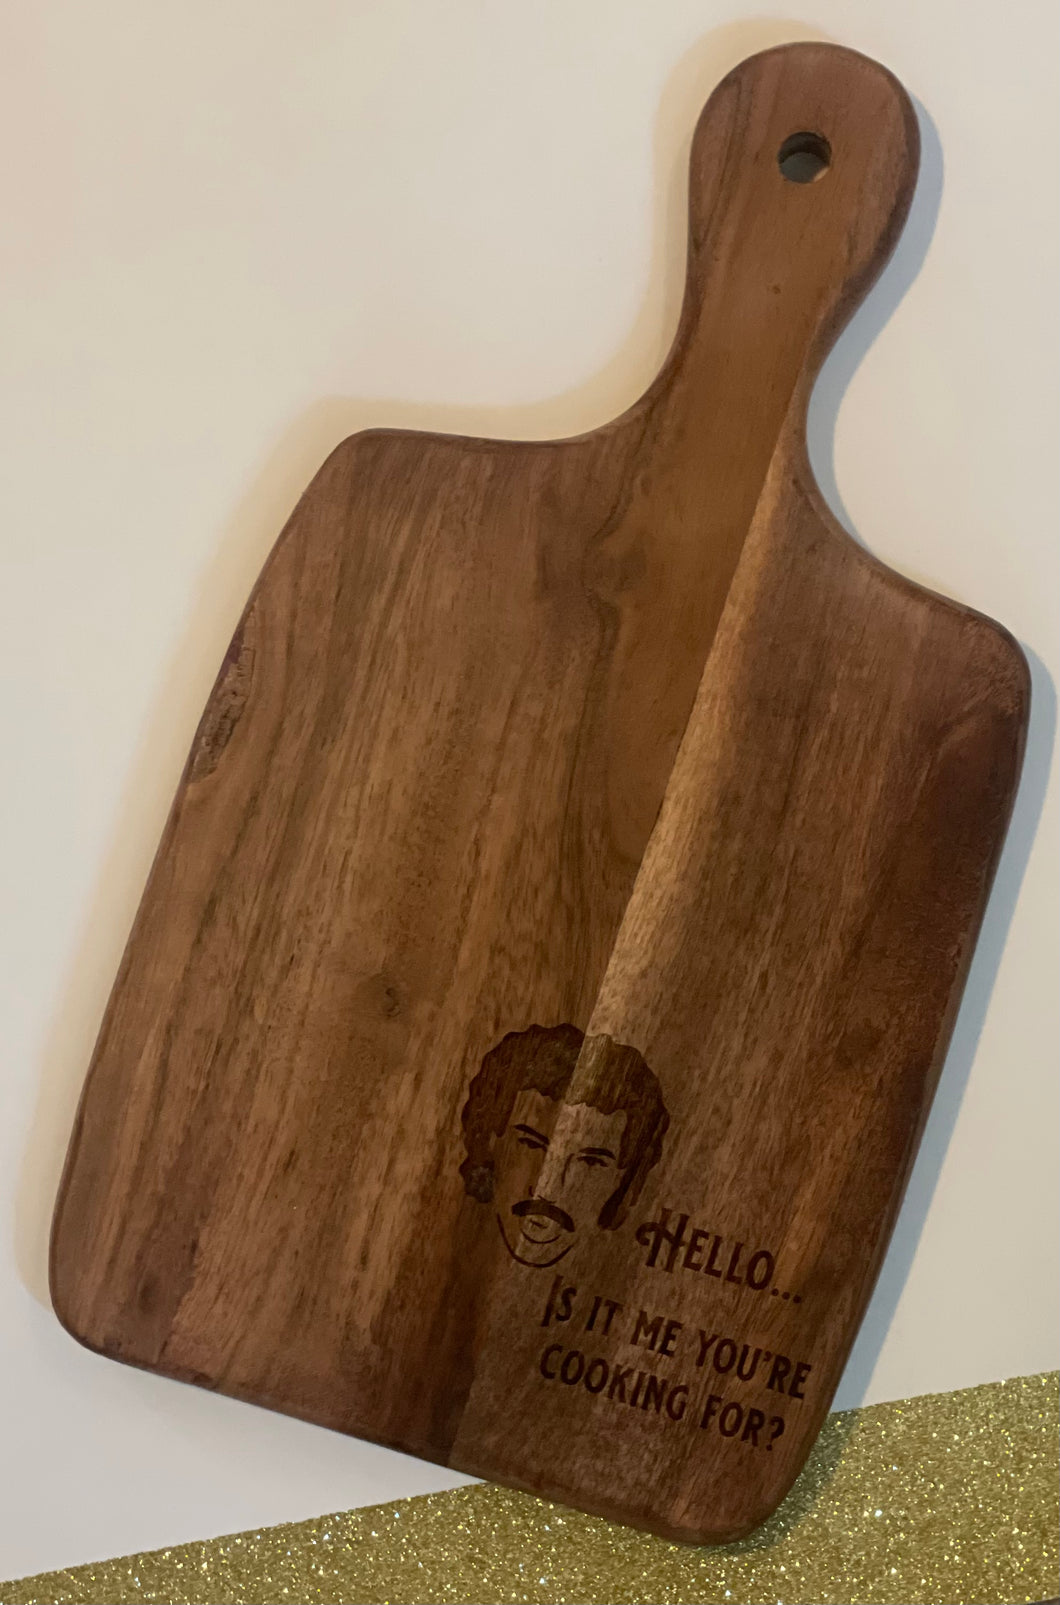 Lionel Richie - Hello, is it me you’re cooking for? Cutting/Serving Board